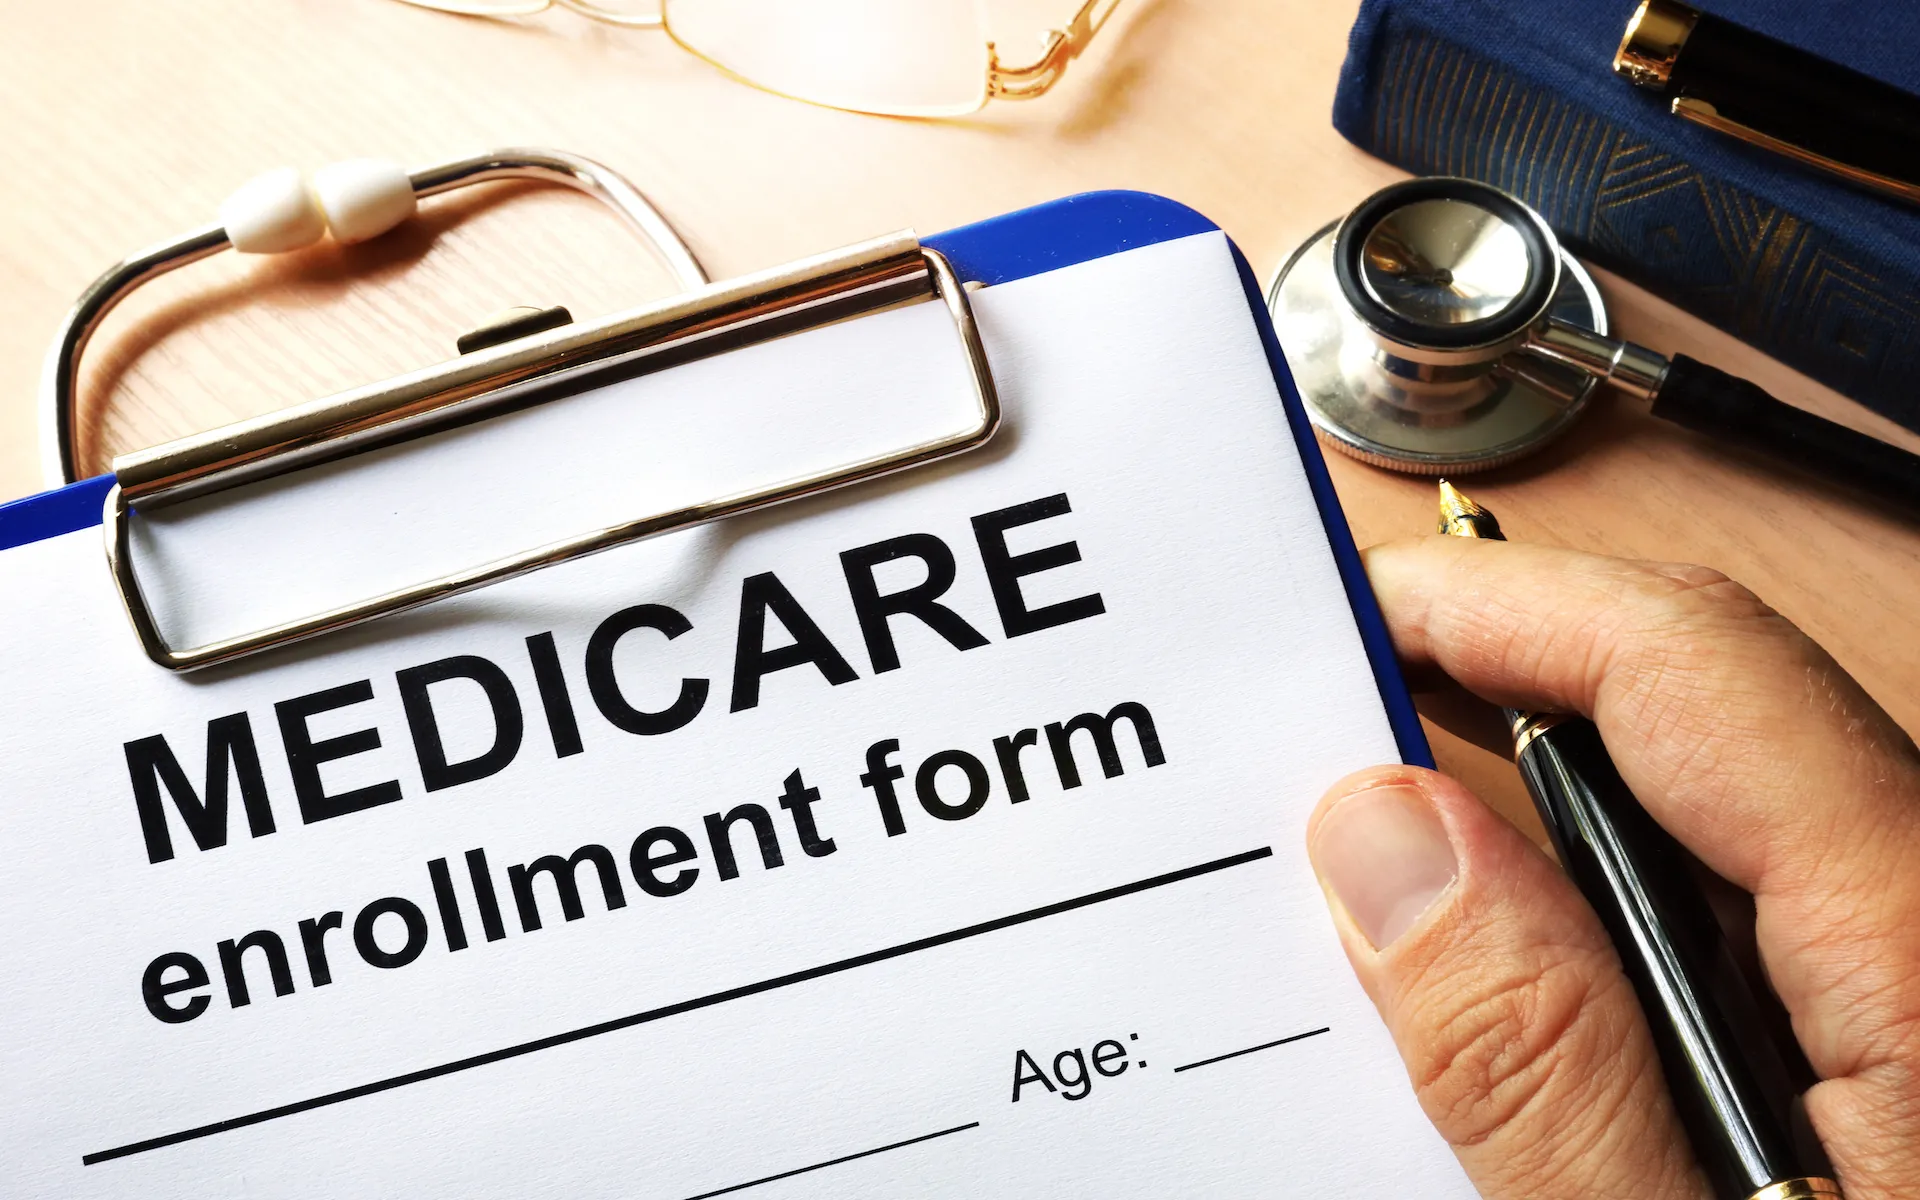 The 2018 Medicare Changes Everyone Needs to Know